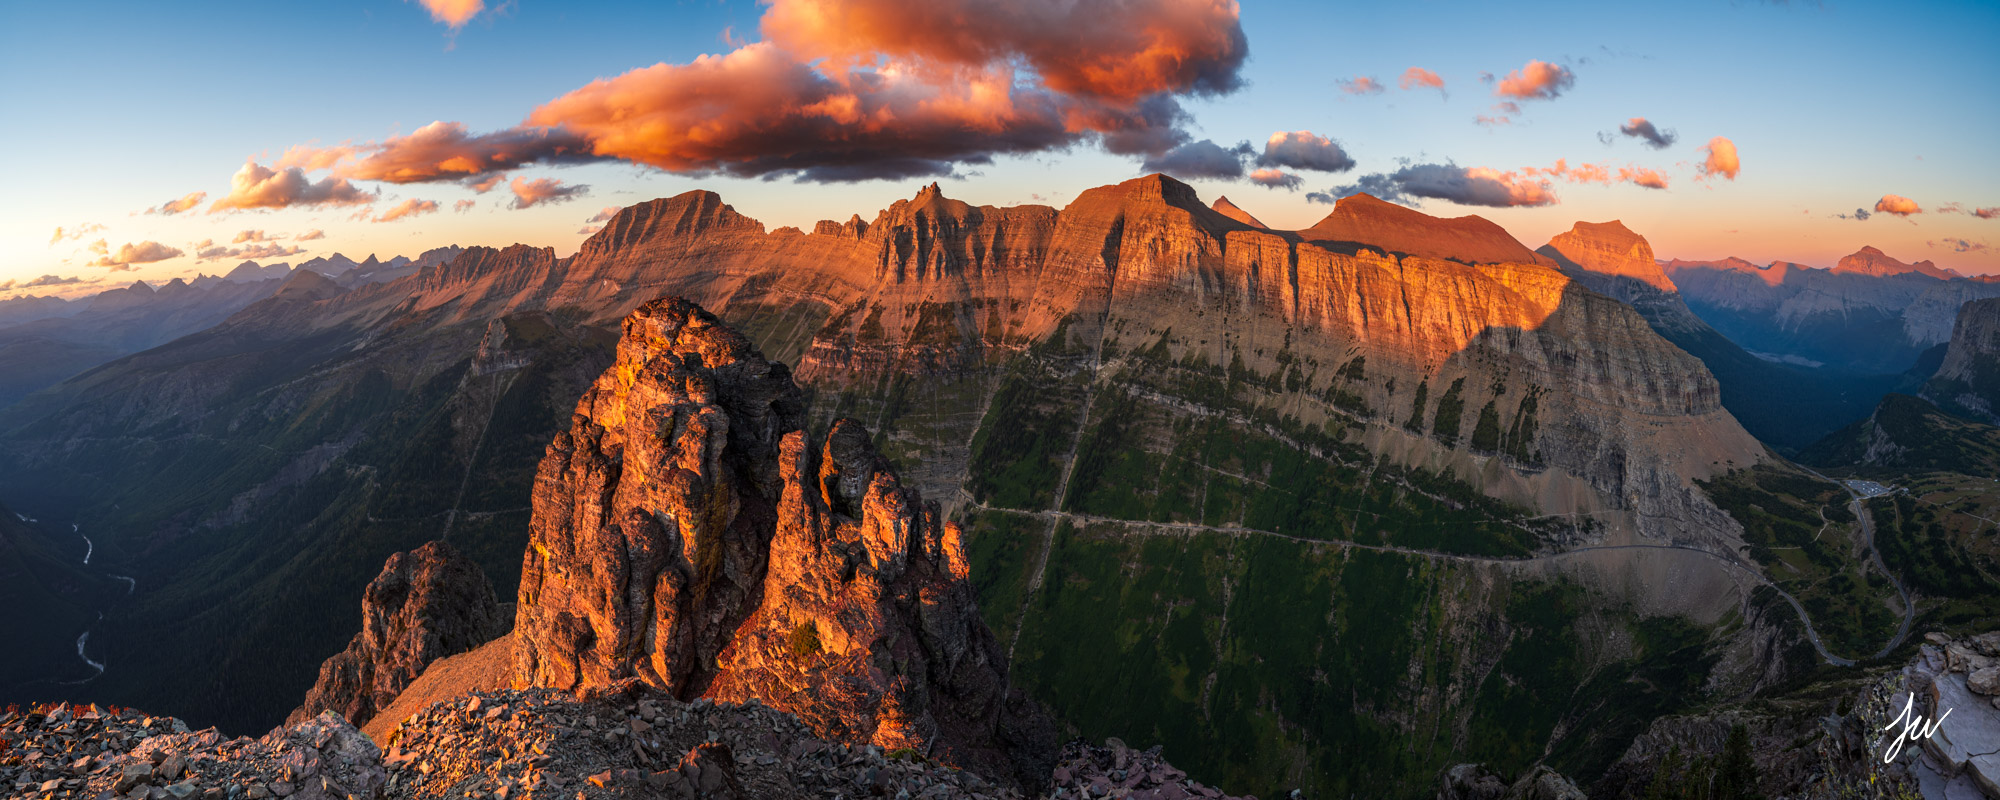 Sunset on the Garden Wall from Logan Pass area in Glacier National Park, Montana. 